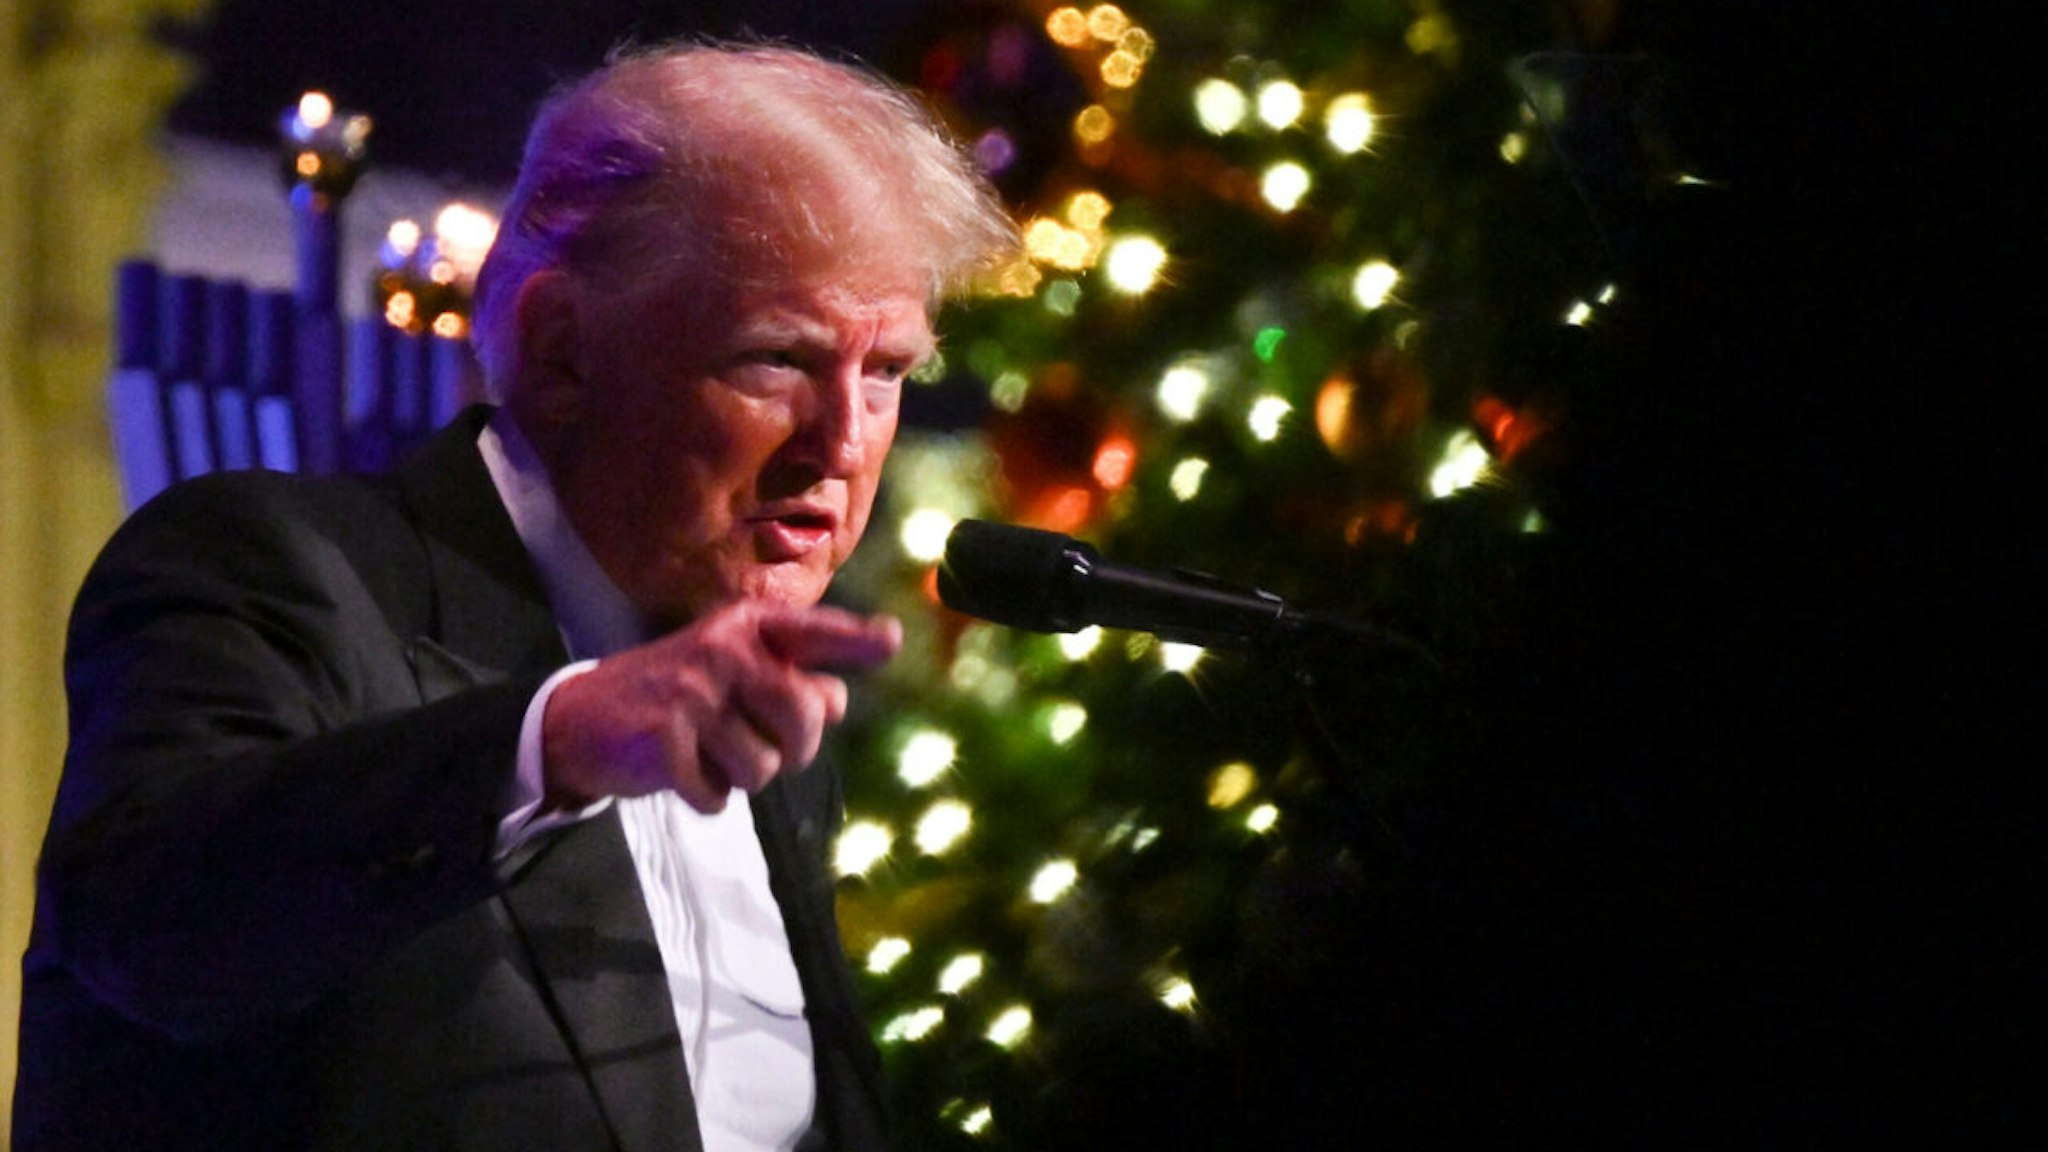 Former US President and presidential hopeful Donald Trump speaks at the New York Young Republican Club's 111th annual gala in New York on December 9, 2023.